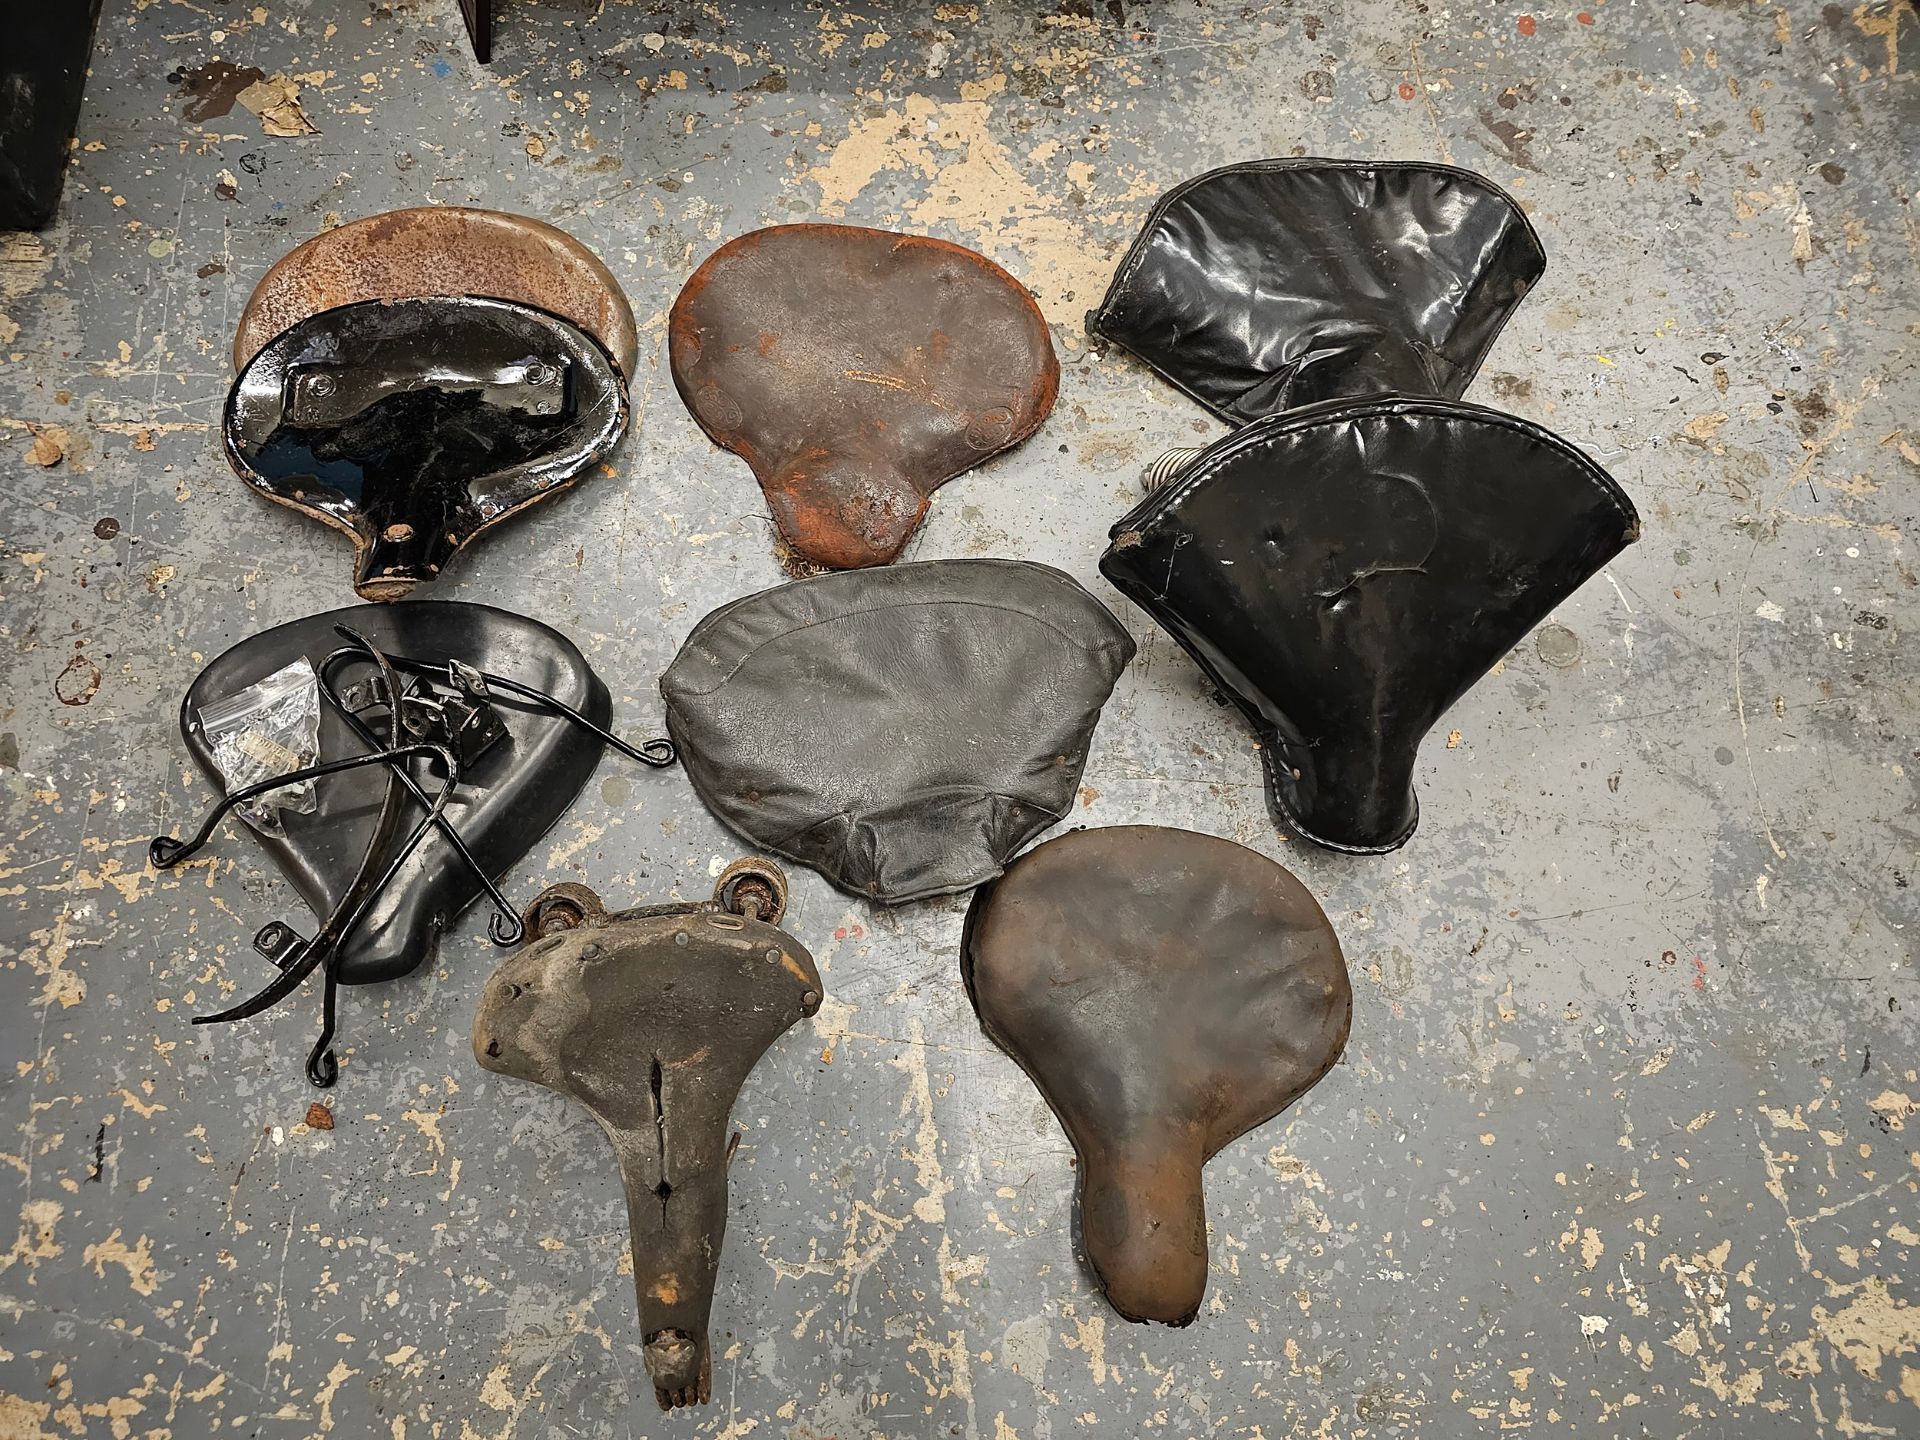 A Dunlop vintage seat and other various vintage motorcycle seats.